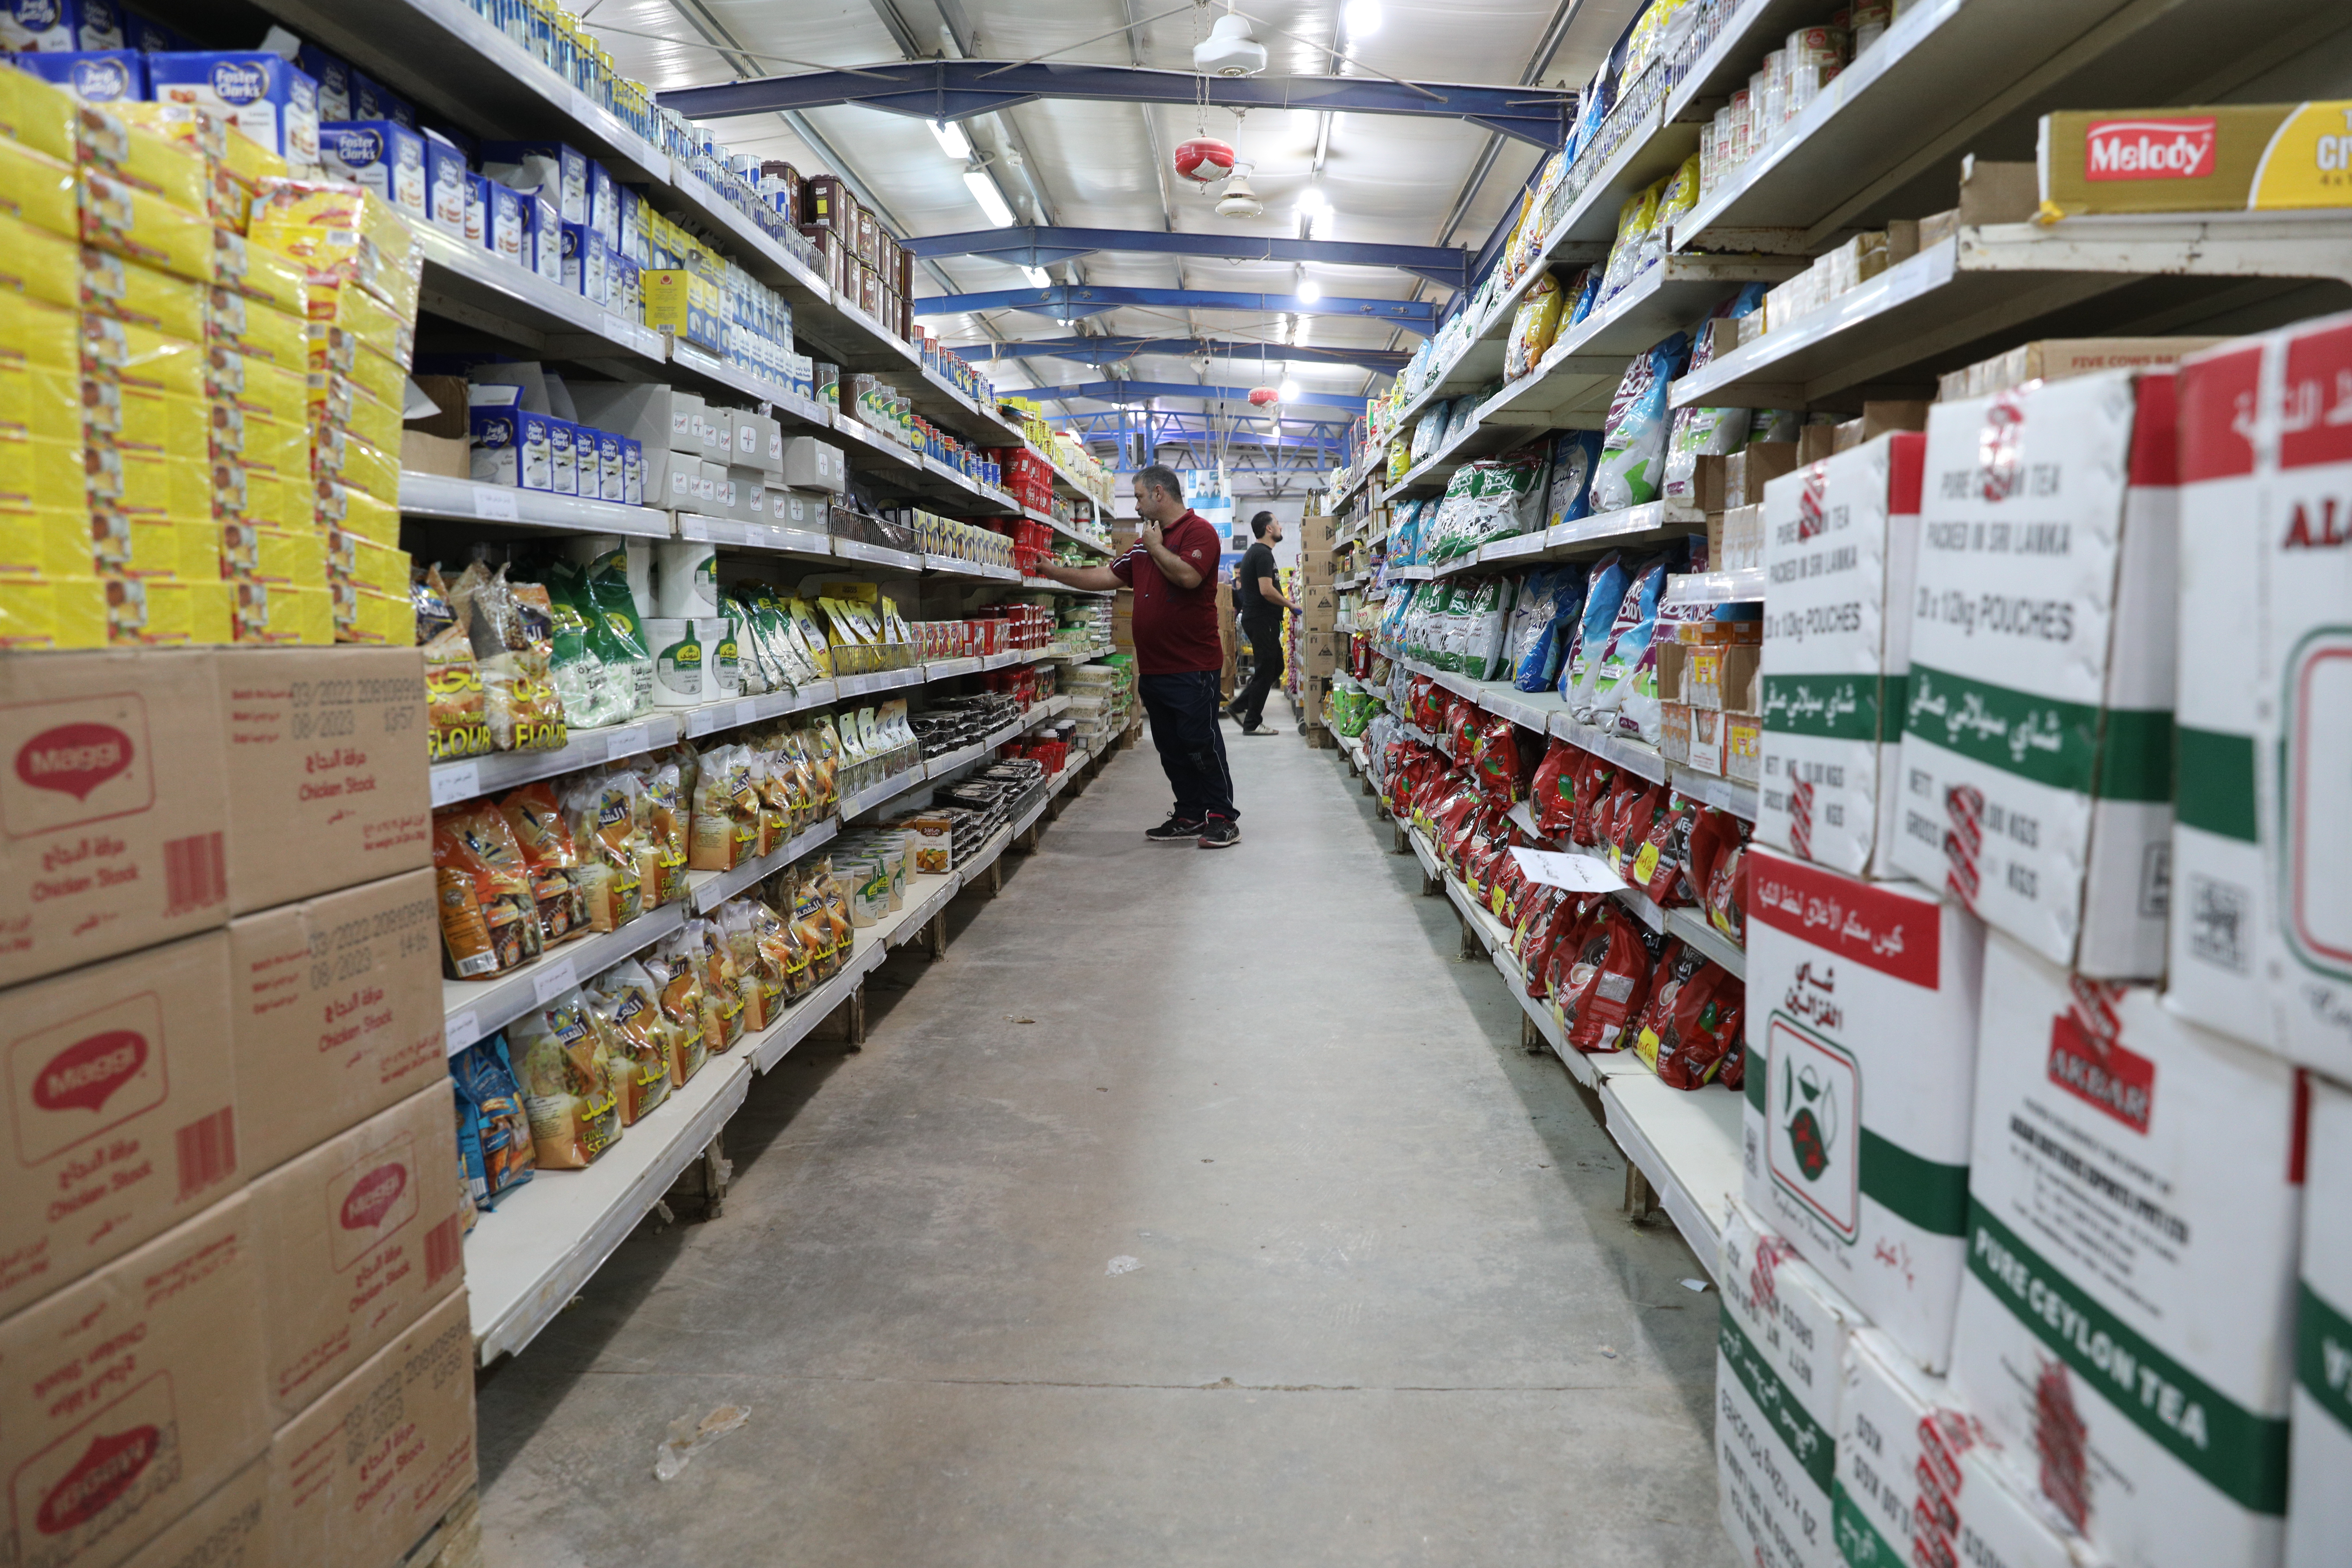 Tazweed supermarket is one of two food stores and four bakeries where Syrian refugees in Jordan’s Za’atari camp can use their WFP assistance, October 2022.